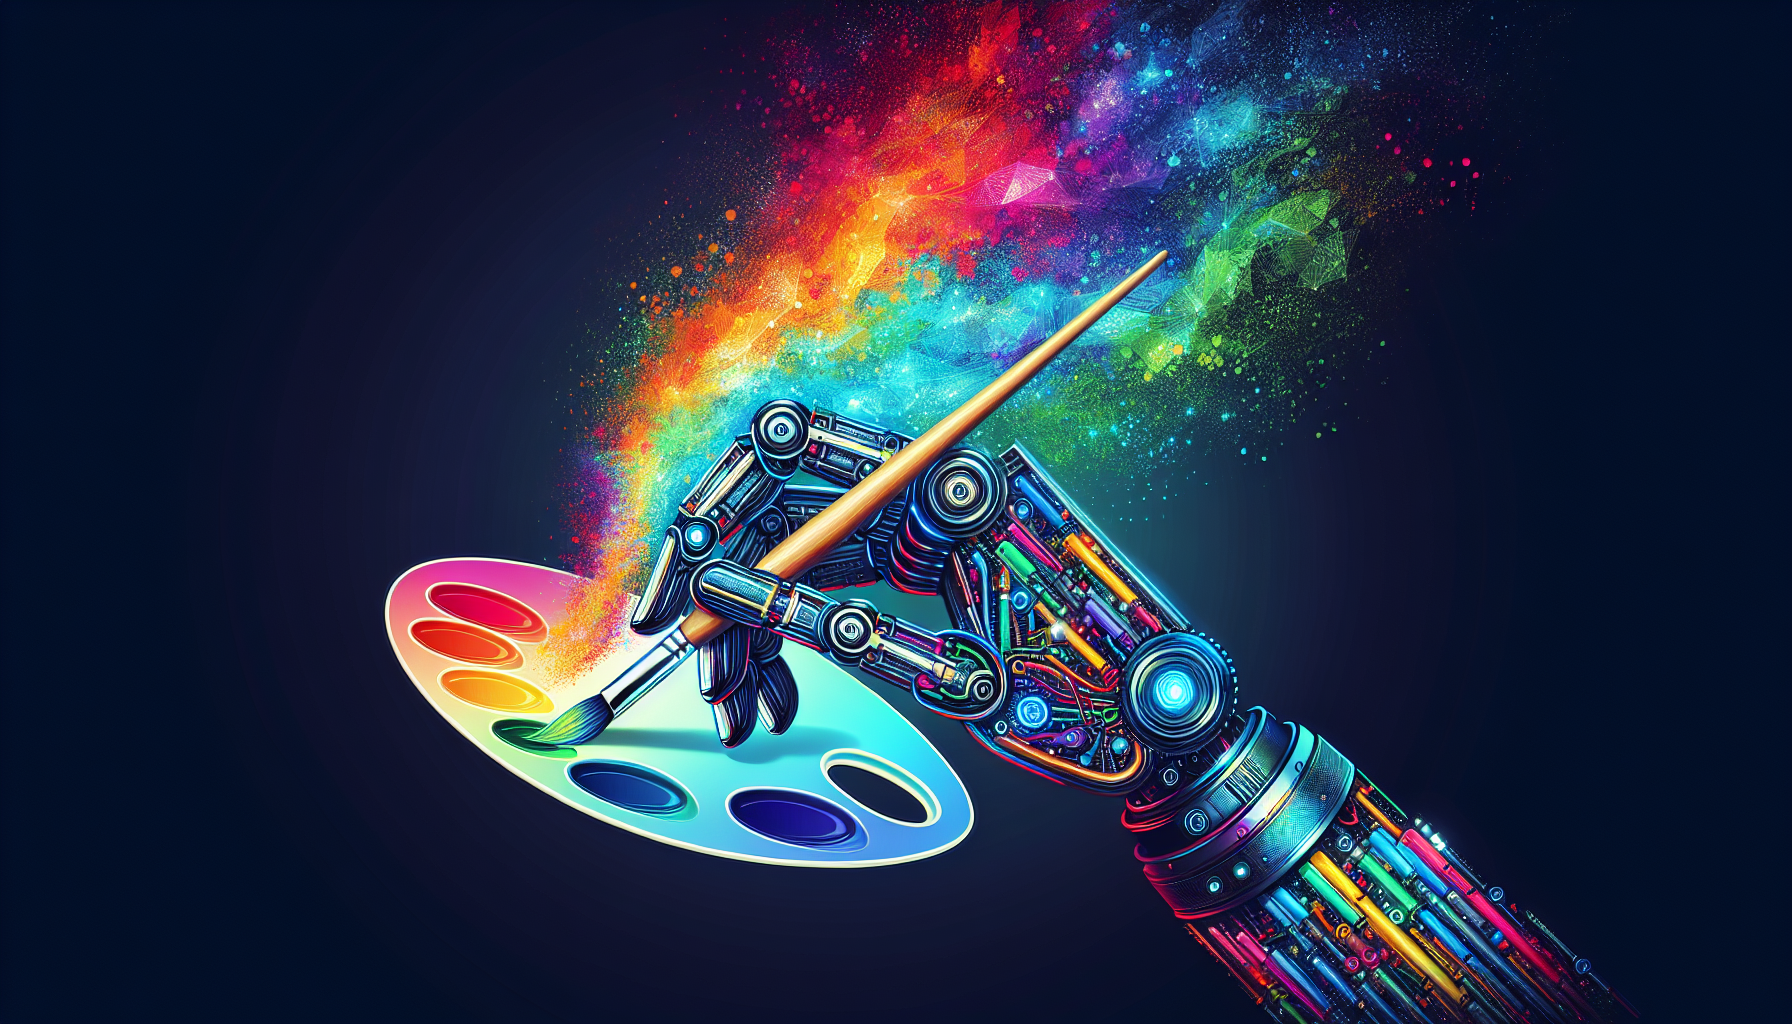 A robotic arm holding a paintbrush dipped in a color palette, generating a rainbow of colors.